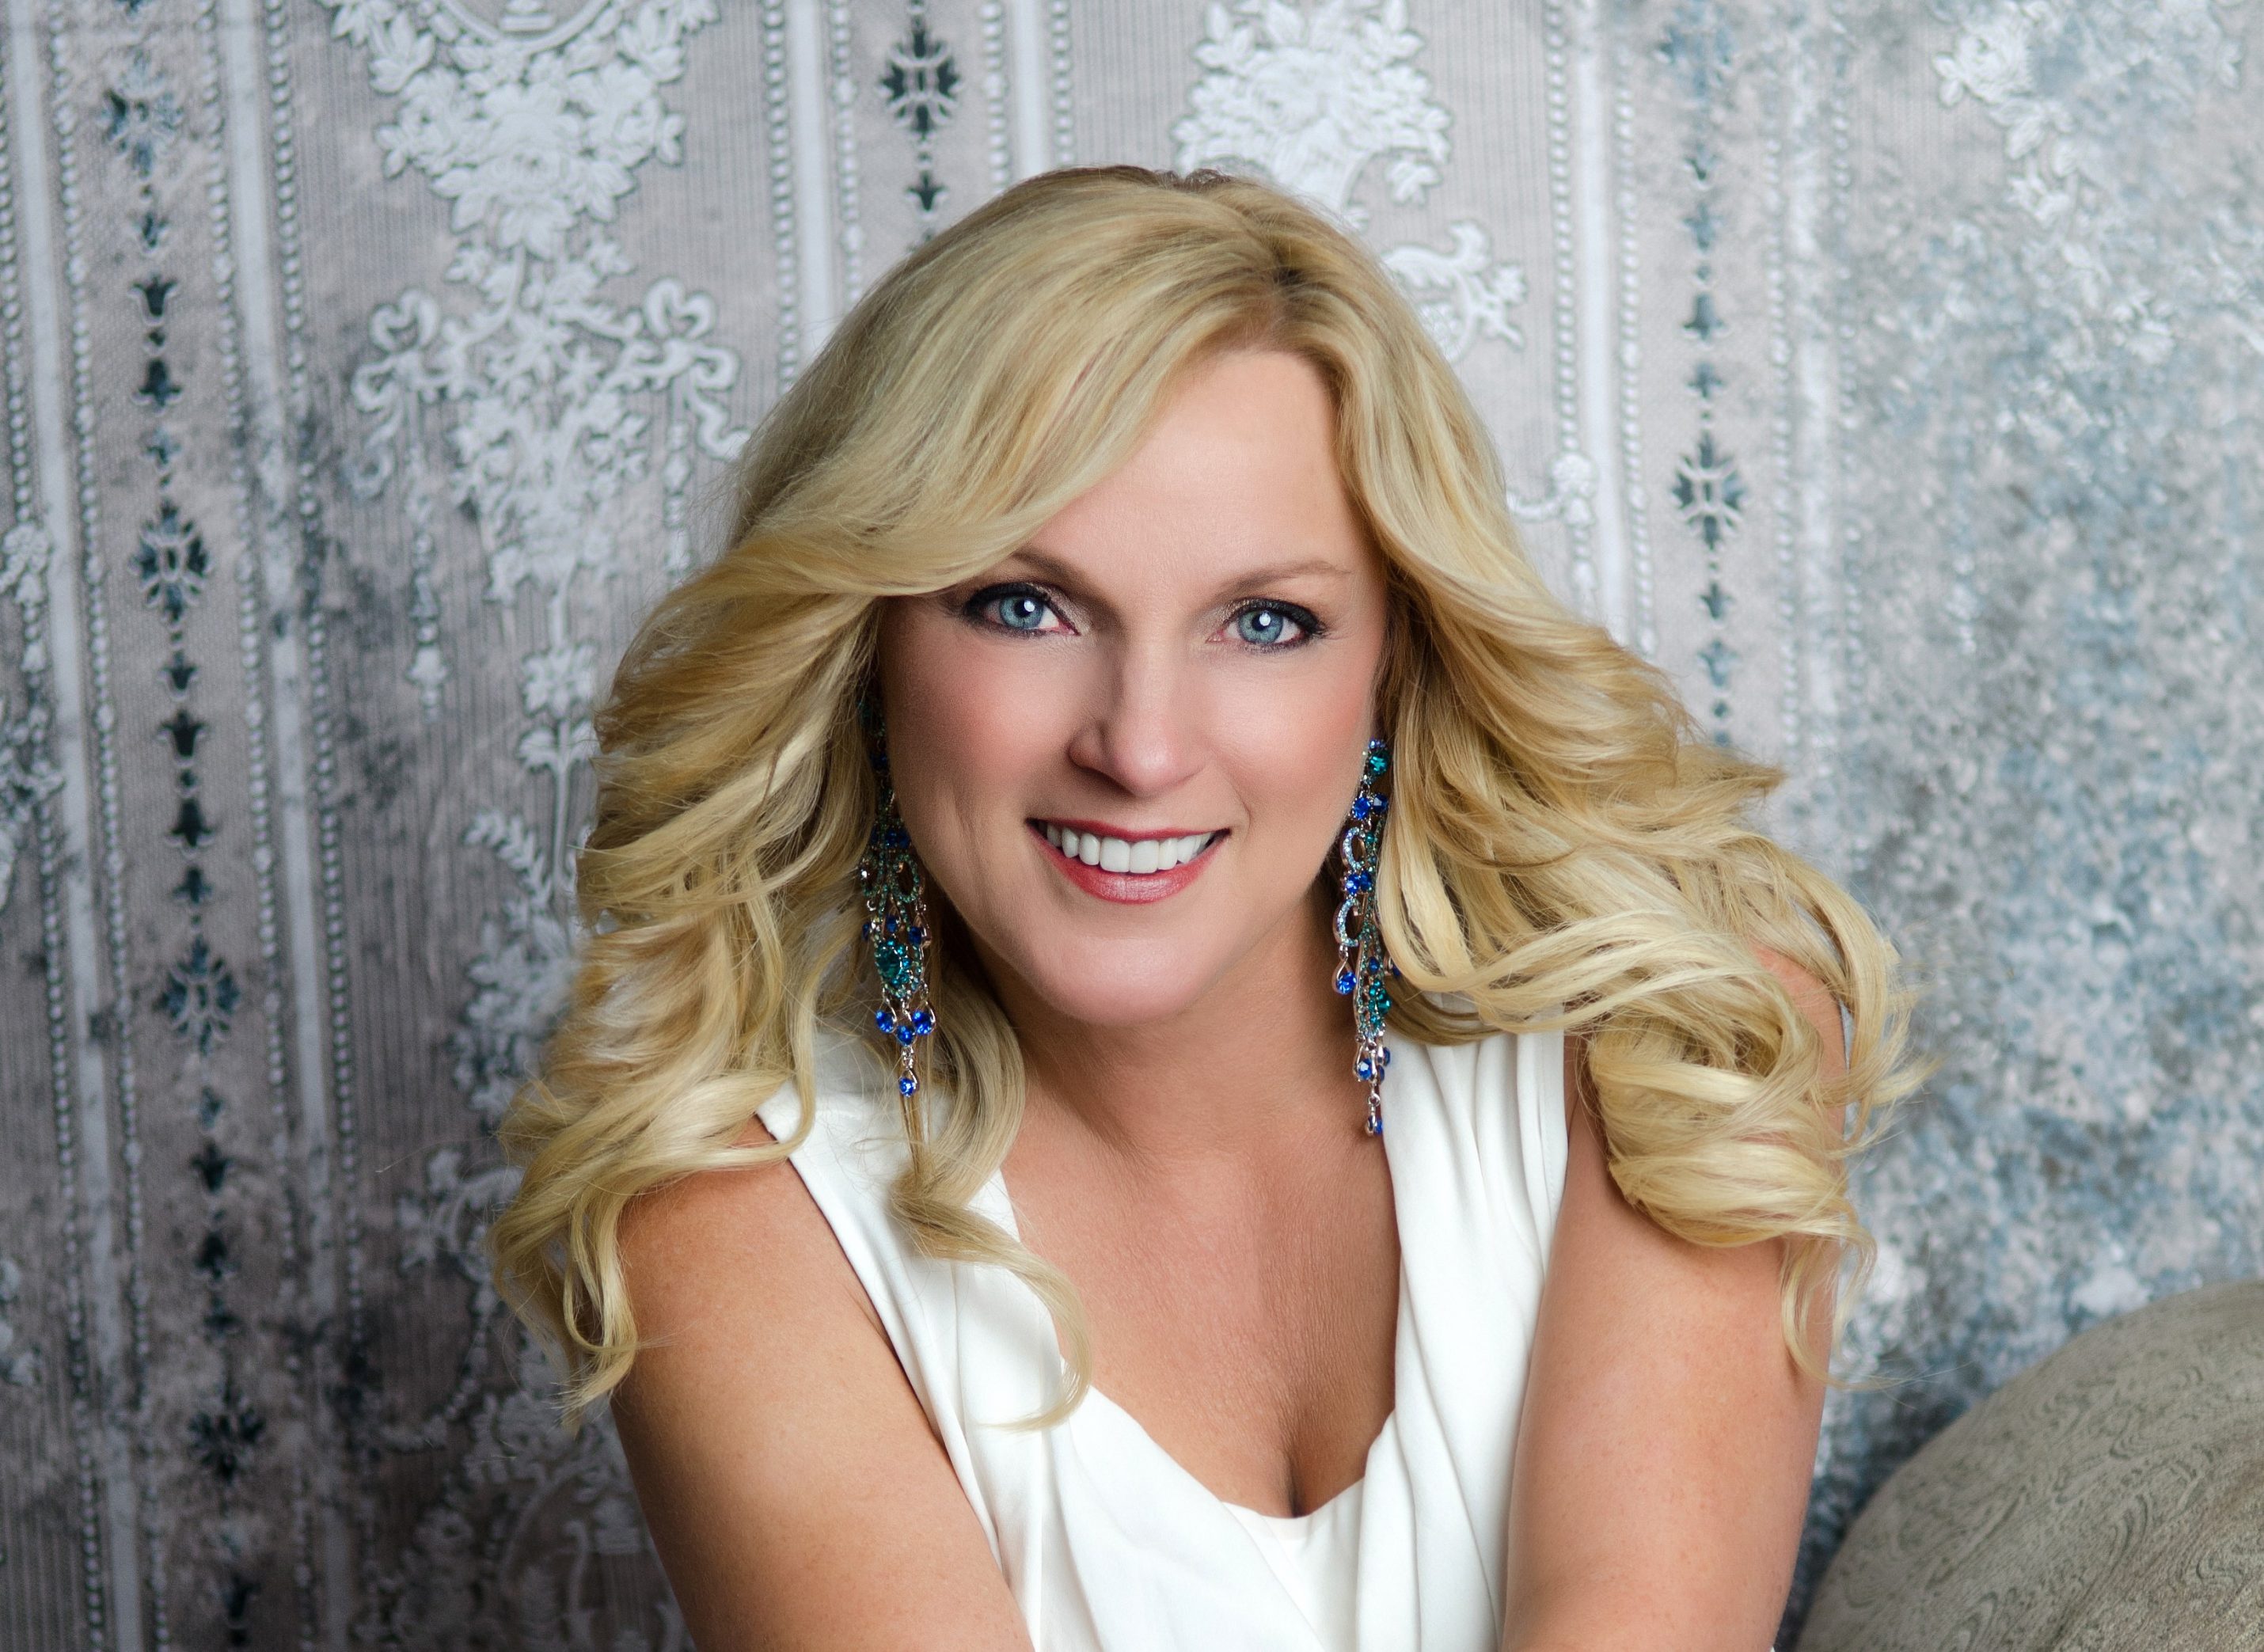 Taking the Wheel: A Visit With Rhonda Vincent